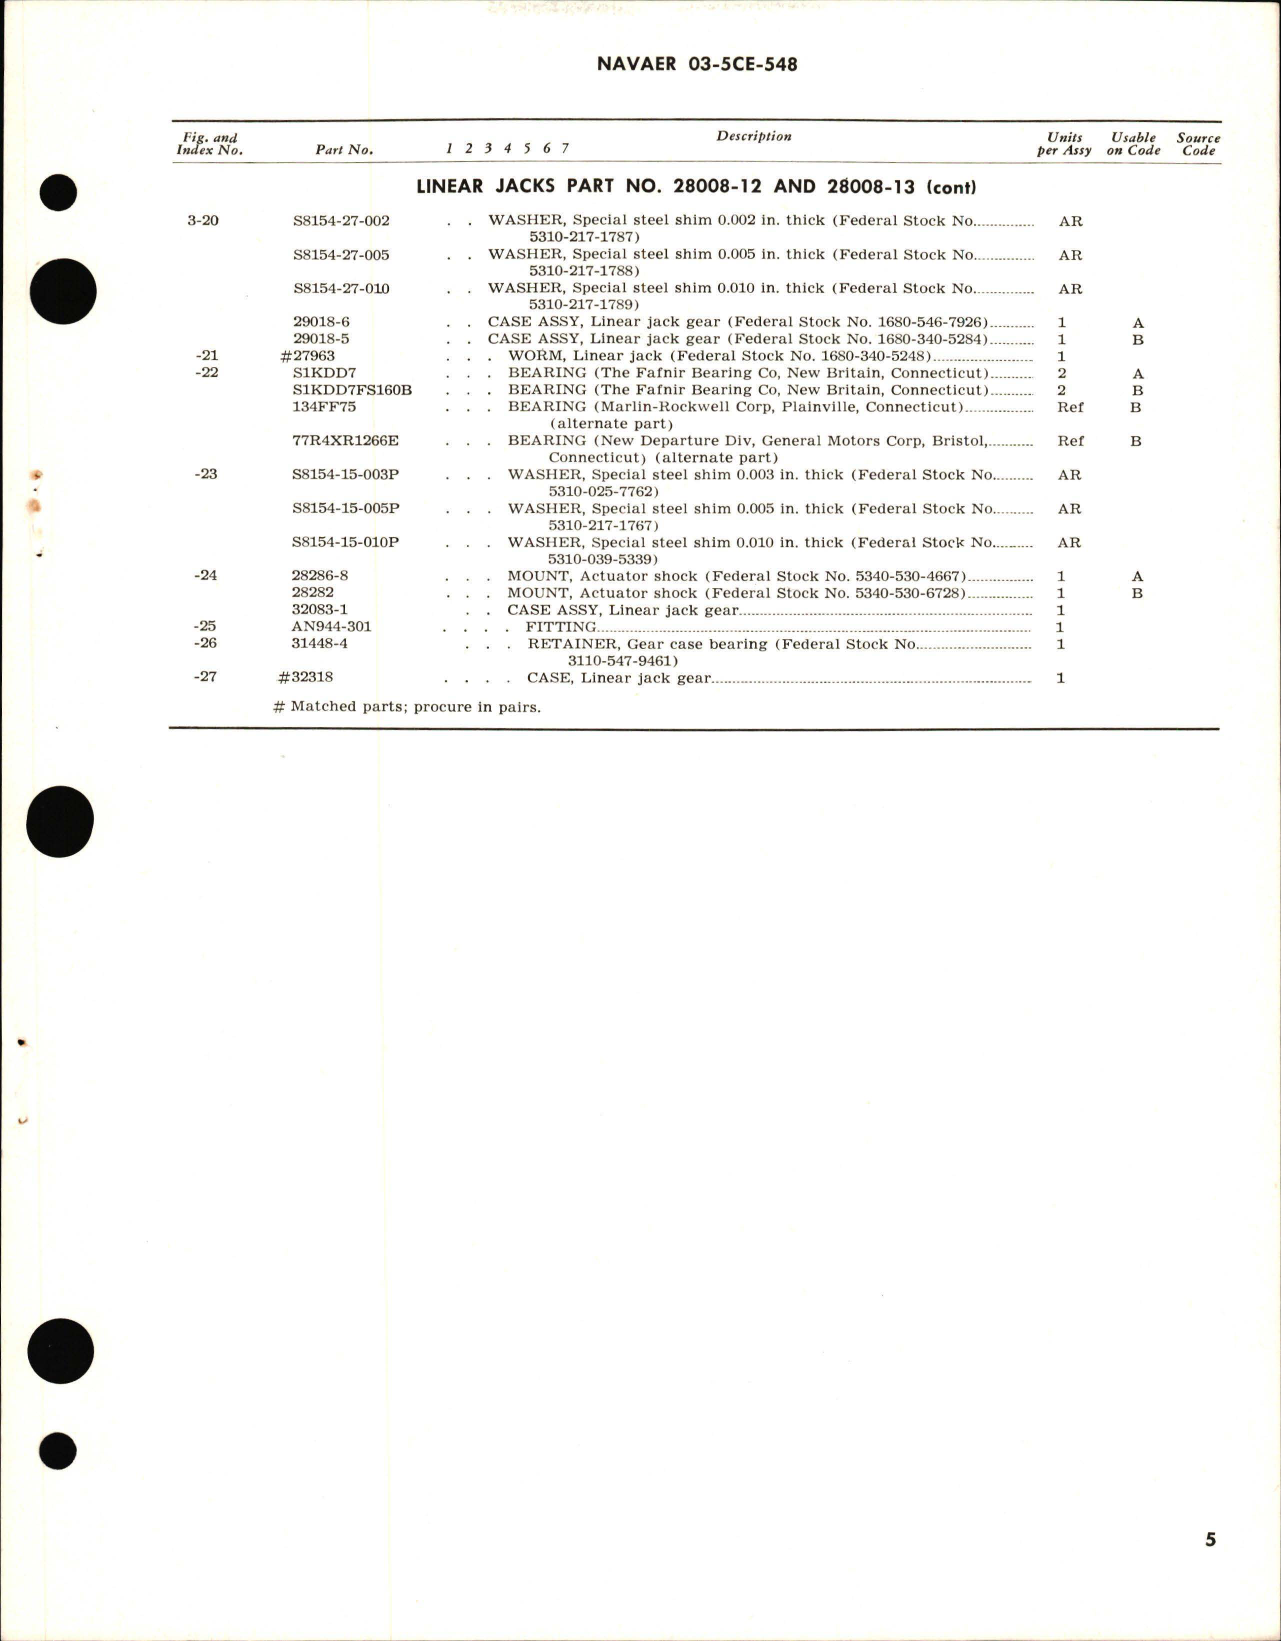 Sample page 5 from AirCorps Library document: Overhaul Instructions with Parts Breakdown for Jacks, Linear - Parts 28008-12 and 28008-13